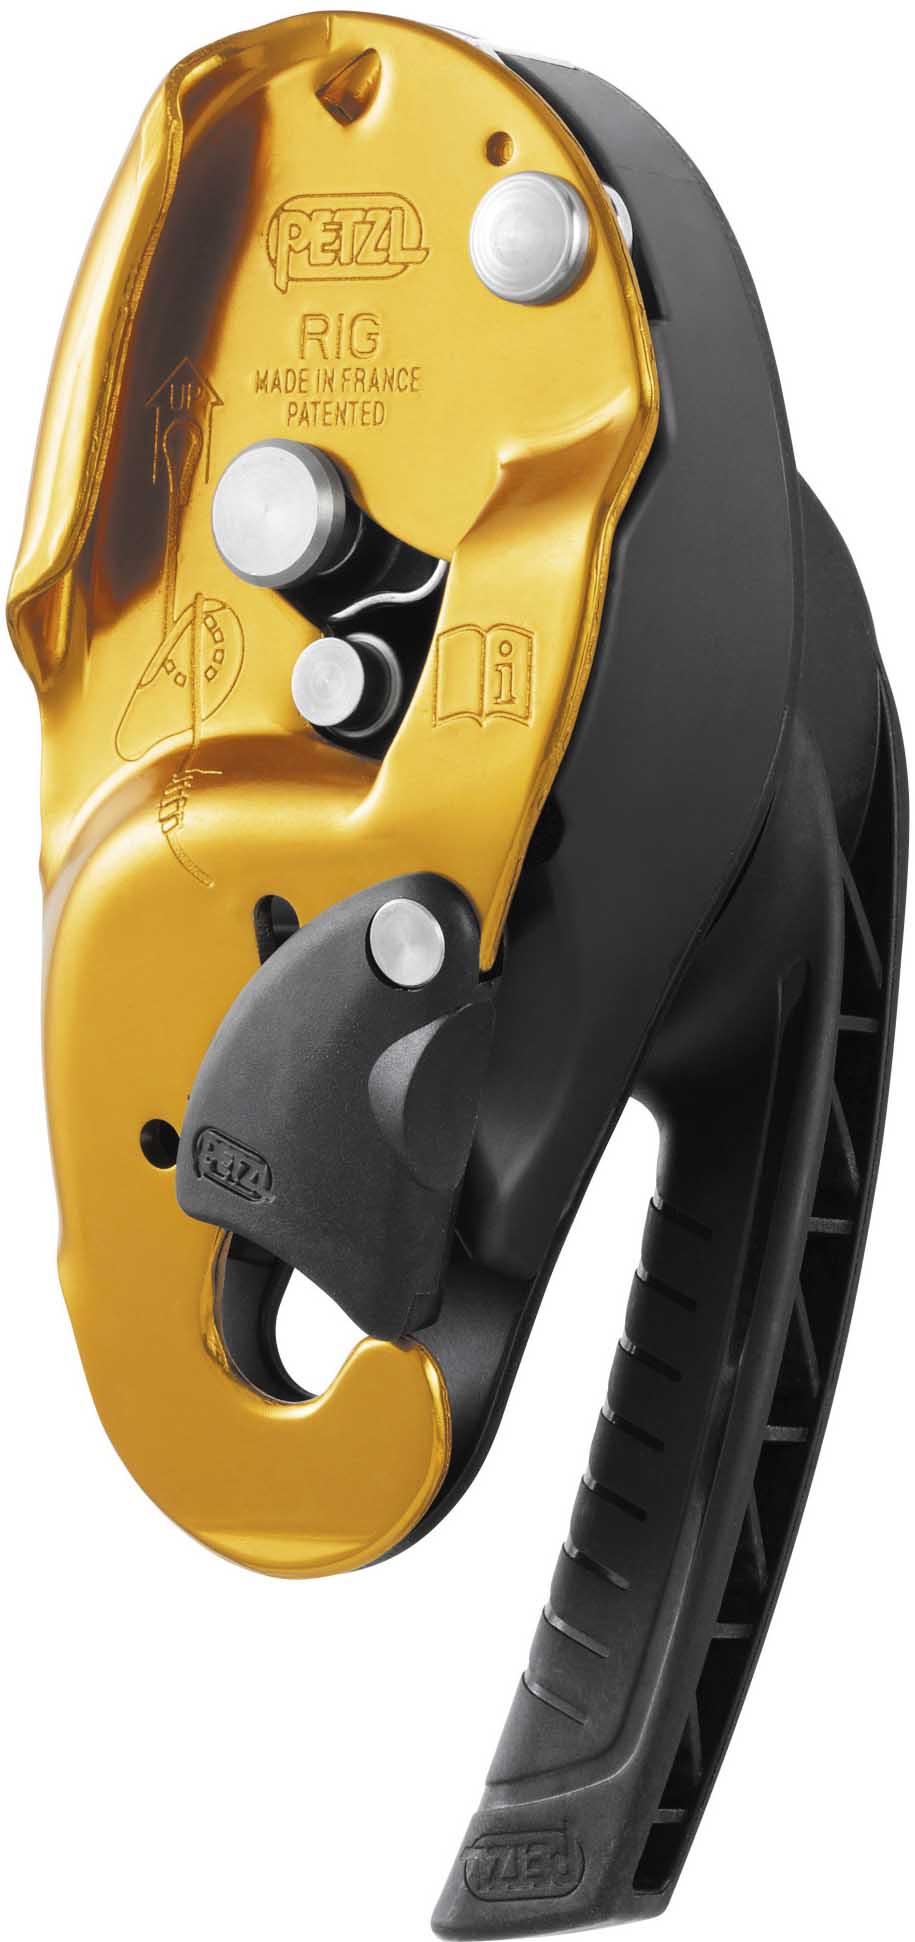 D21A Petzl Rig Compact Self-Braking Descender from Columbia Safety